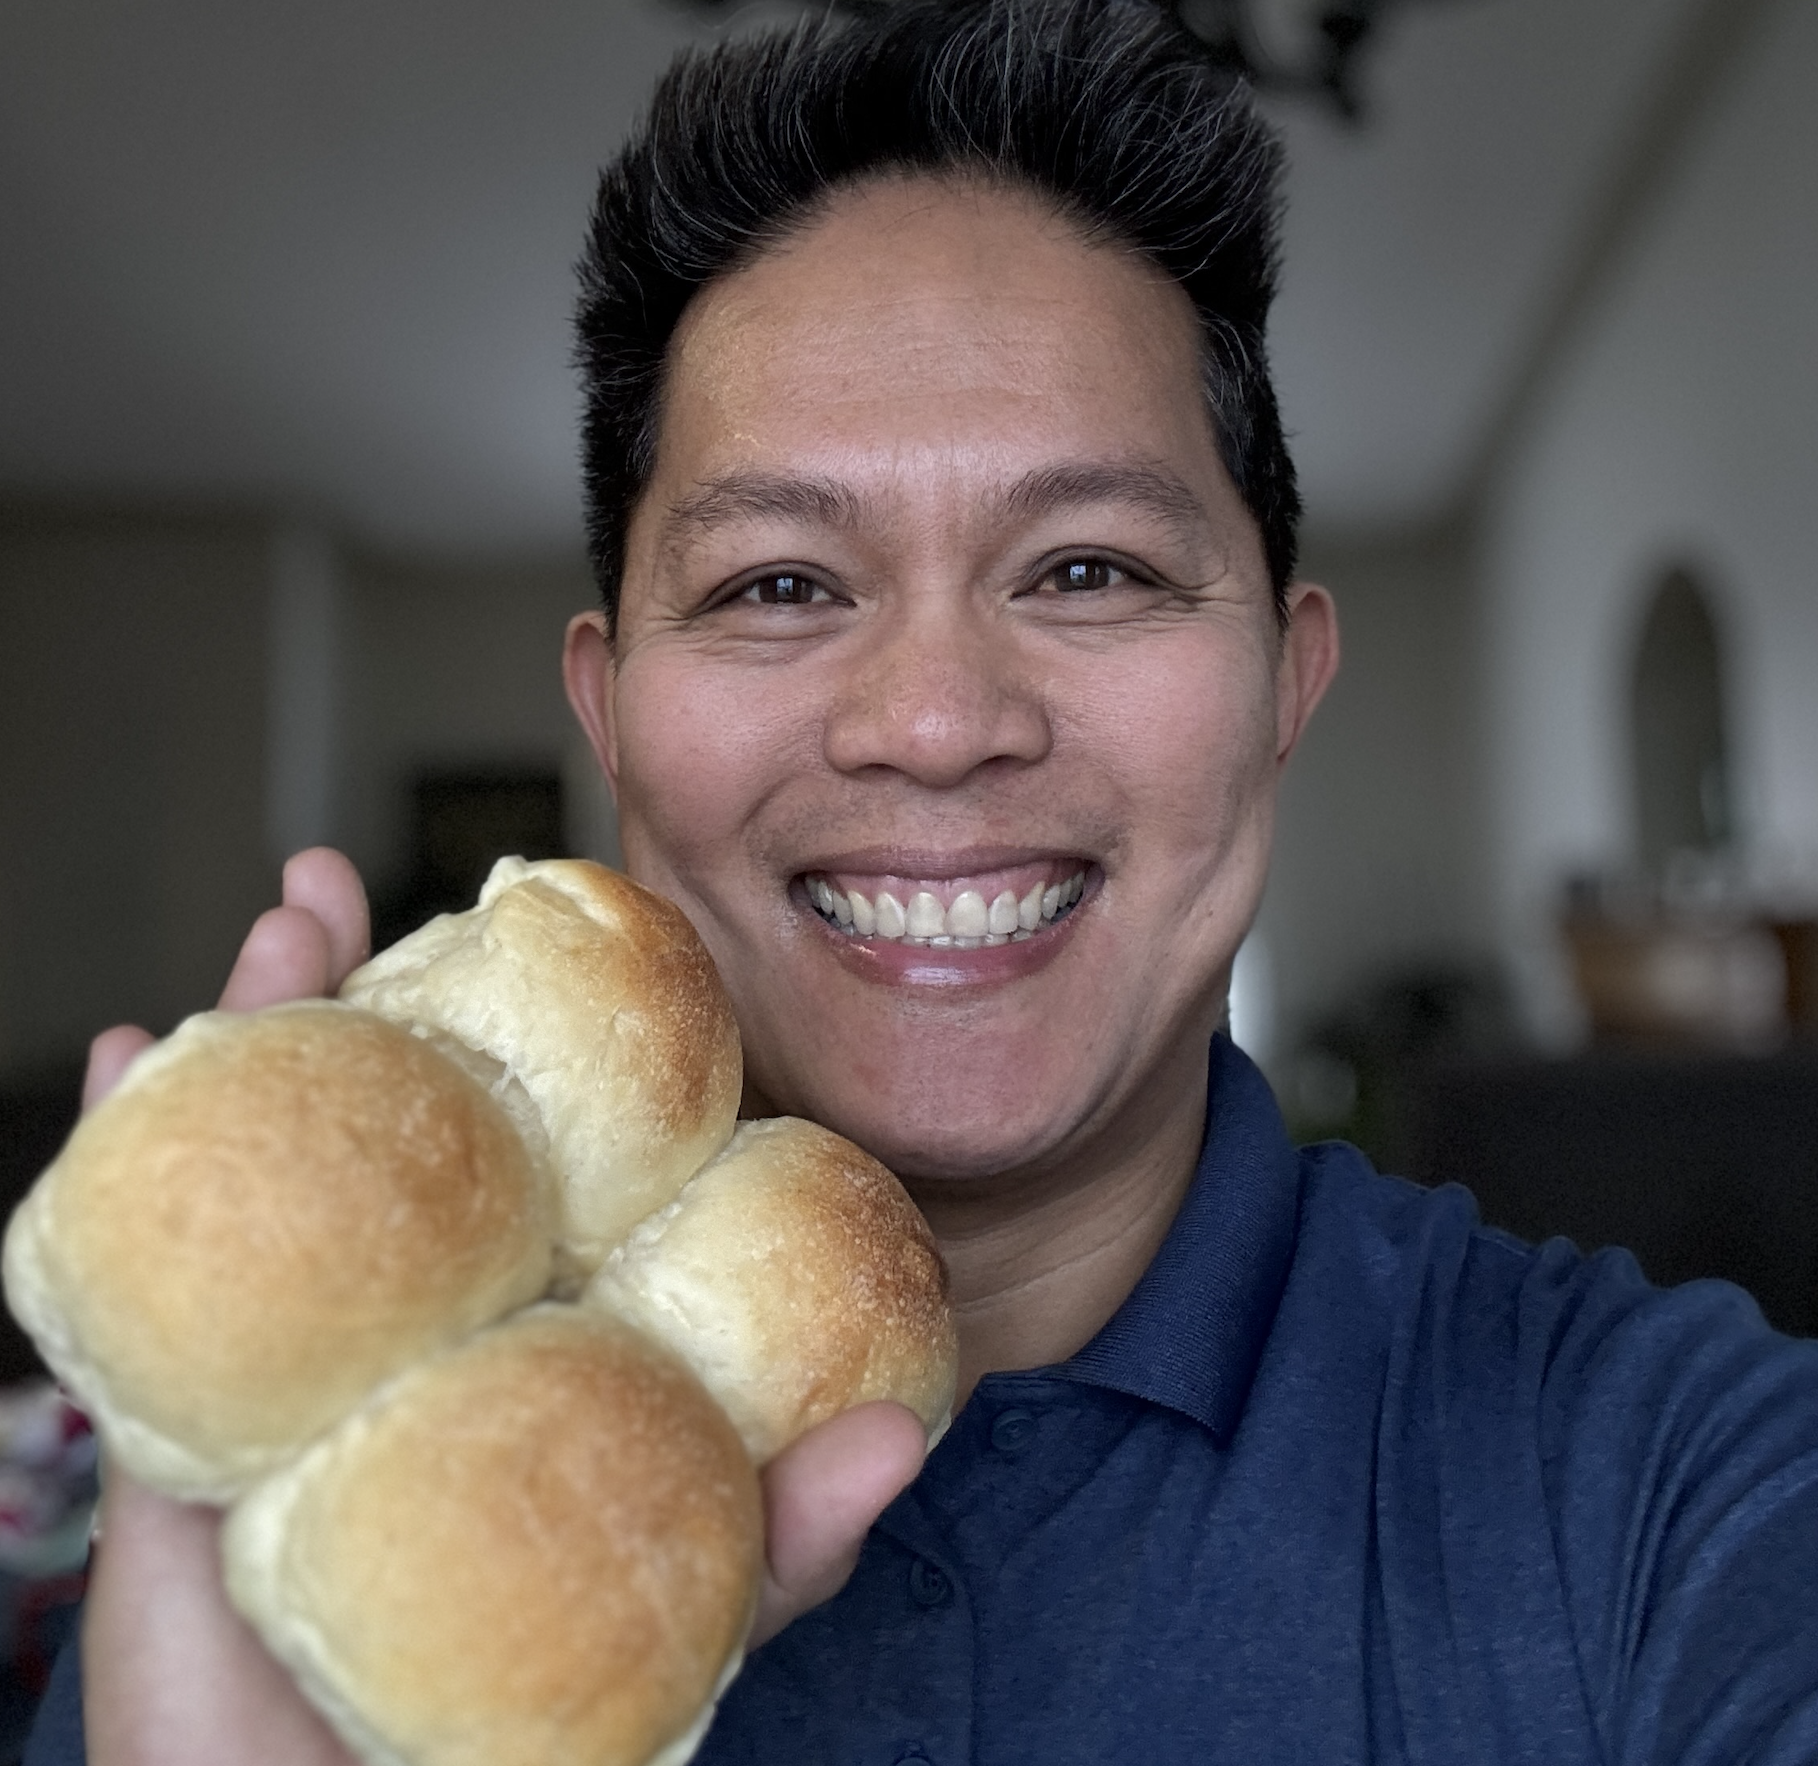 Bryans Buns Sourdough Pandesal Recipe Digital Download Step-by-Step Guide Raise Money for Mental Health Charity in Canada